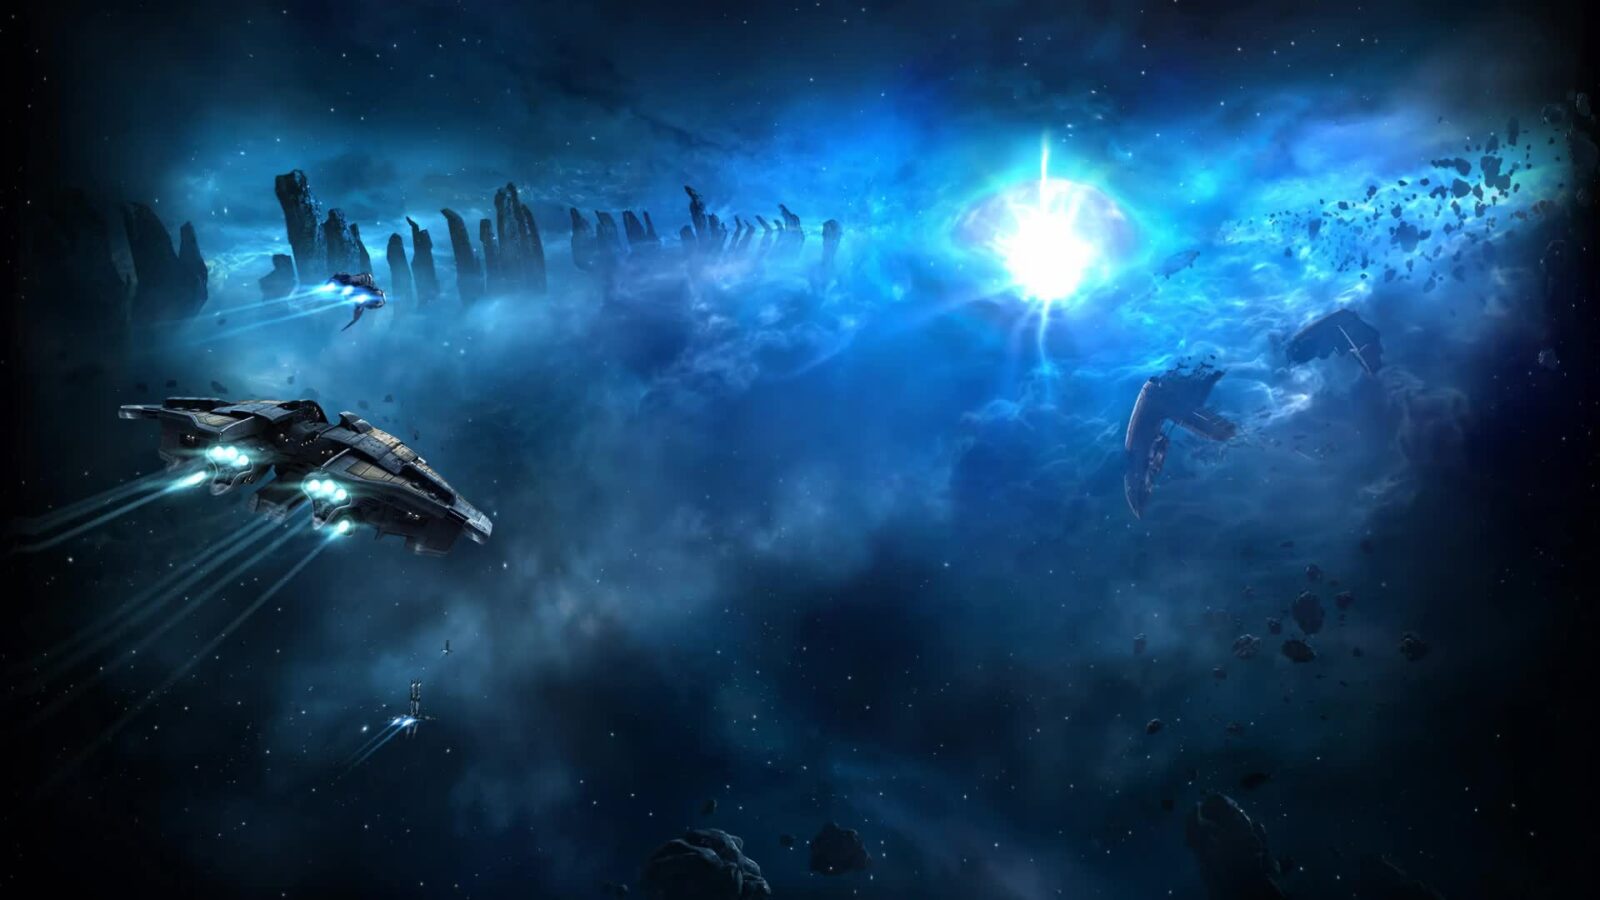 LiveWallpapers4Free.com | Fantasy Battle Spaceship Attack - Free Live Wallpaper